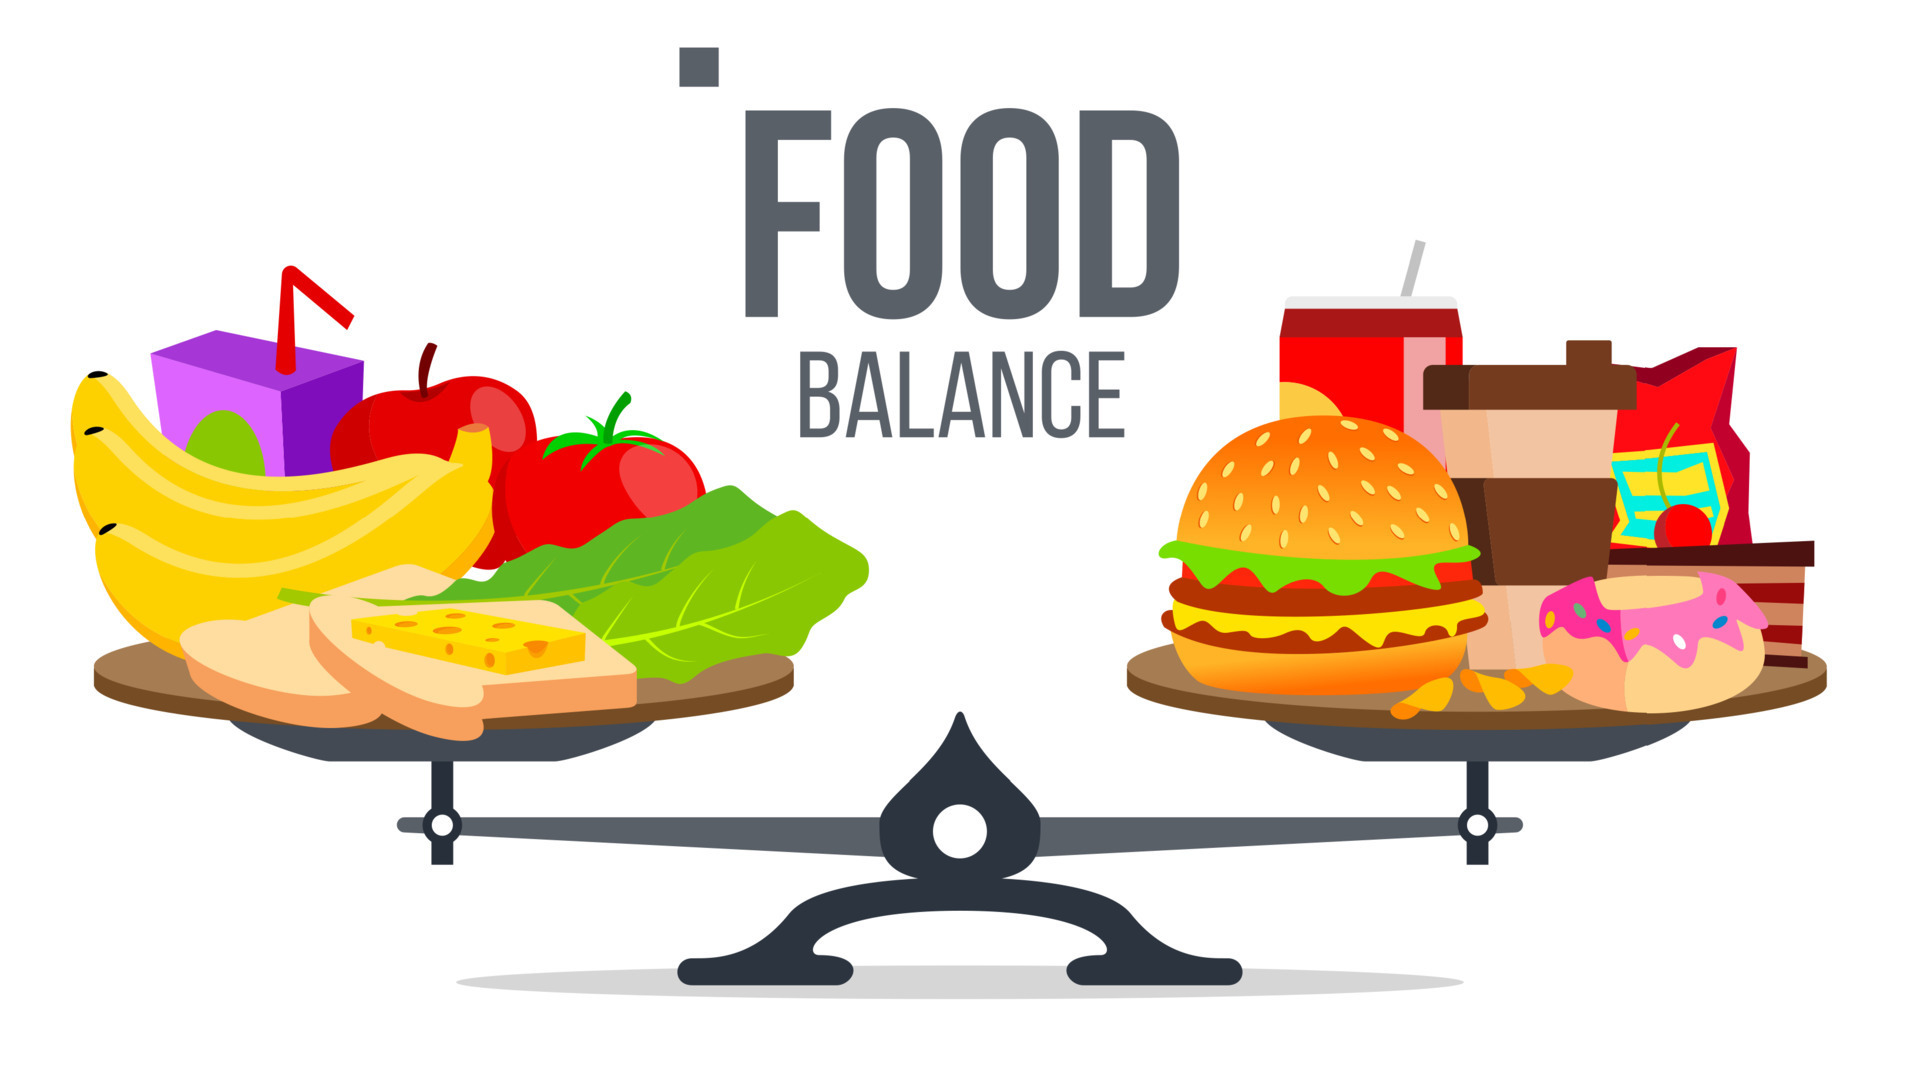 https://static.vecteezy.com/system/resources/previews/017/390/043/original/balance-of-healthy-and-unhealthy-food-isolated-cartoon-illustration-vector.jpg